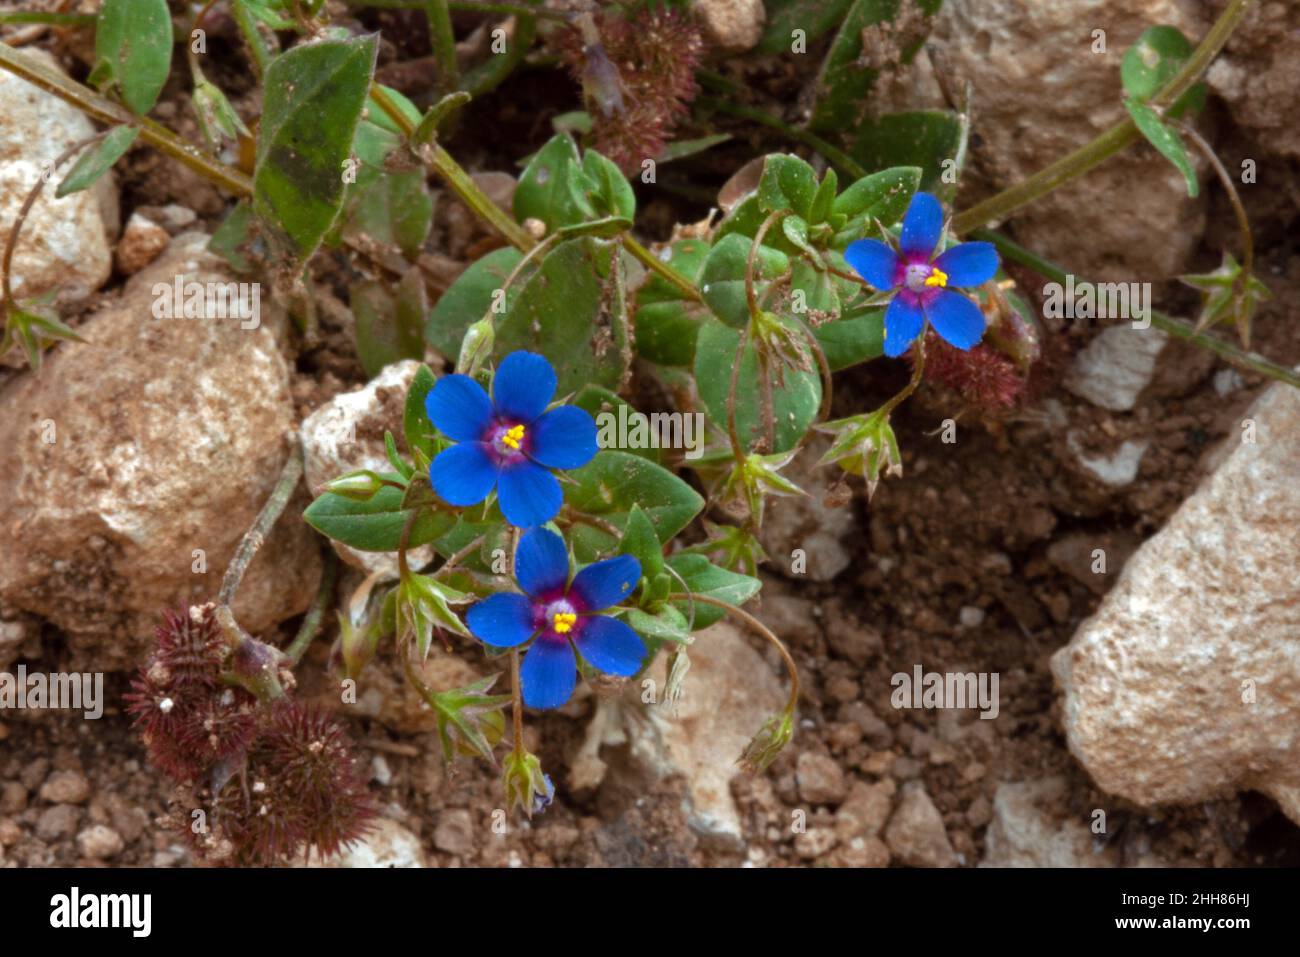 Anagallis arvensis var. caerulea is a blue variety of the scarlet pimpernel (blue pimpernel). This picture was taken on Cyprus. Stock Photo